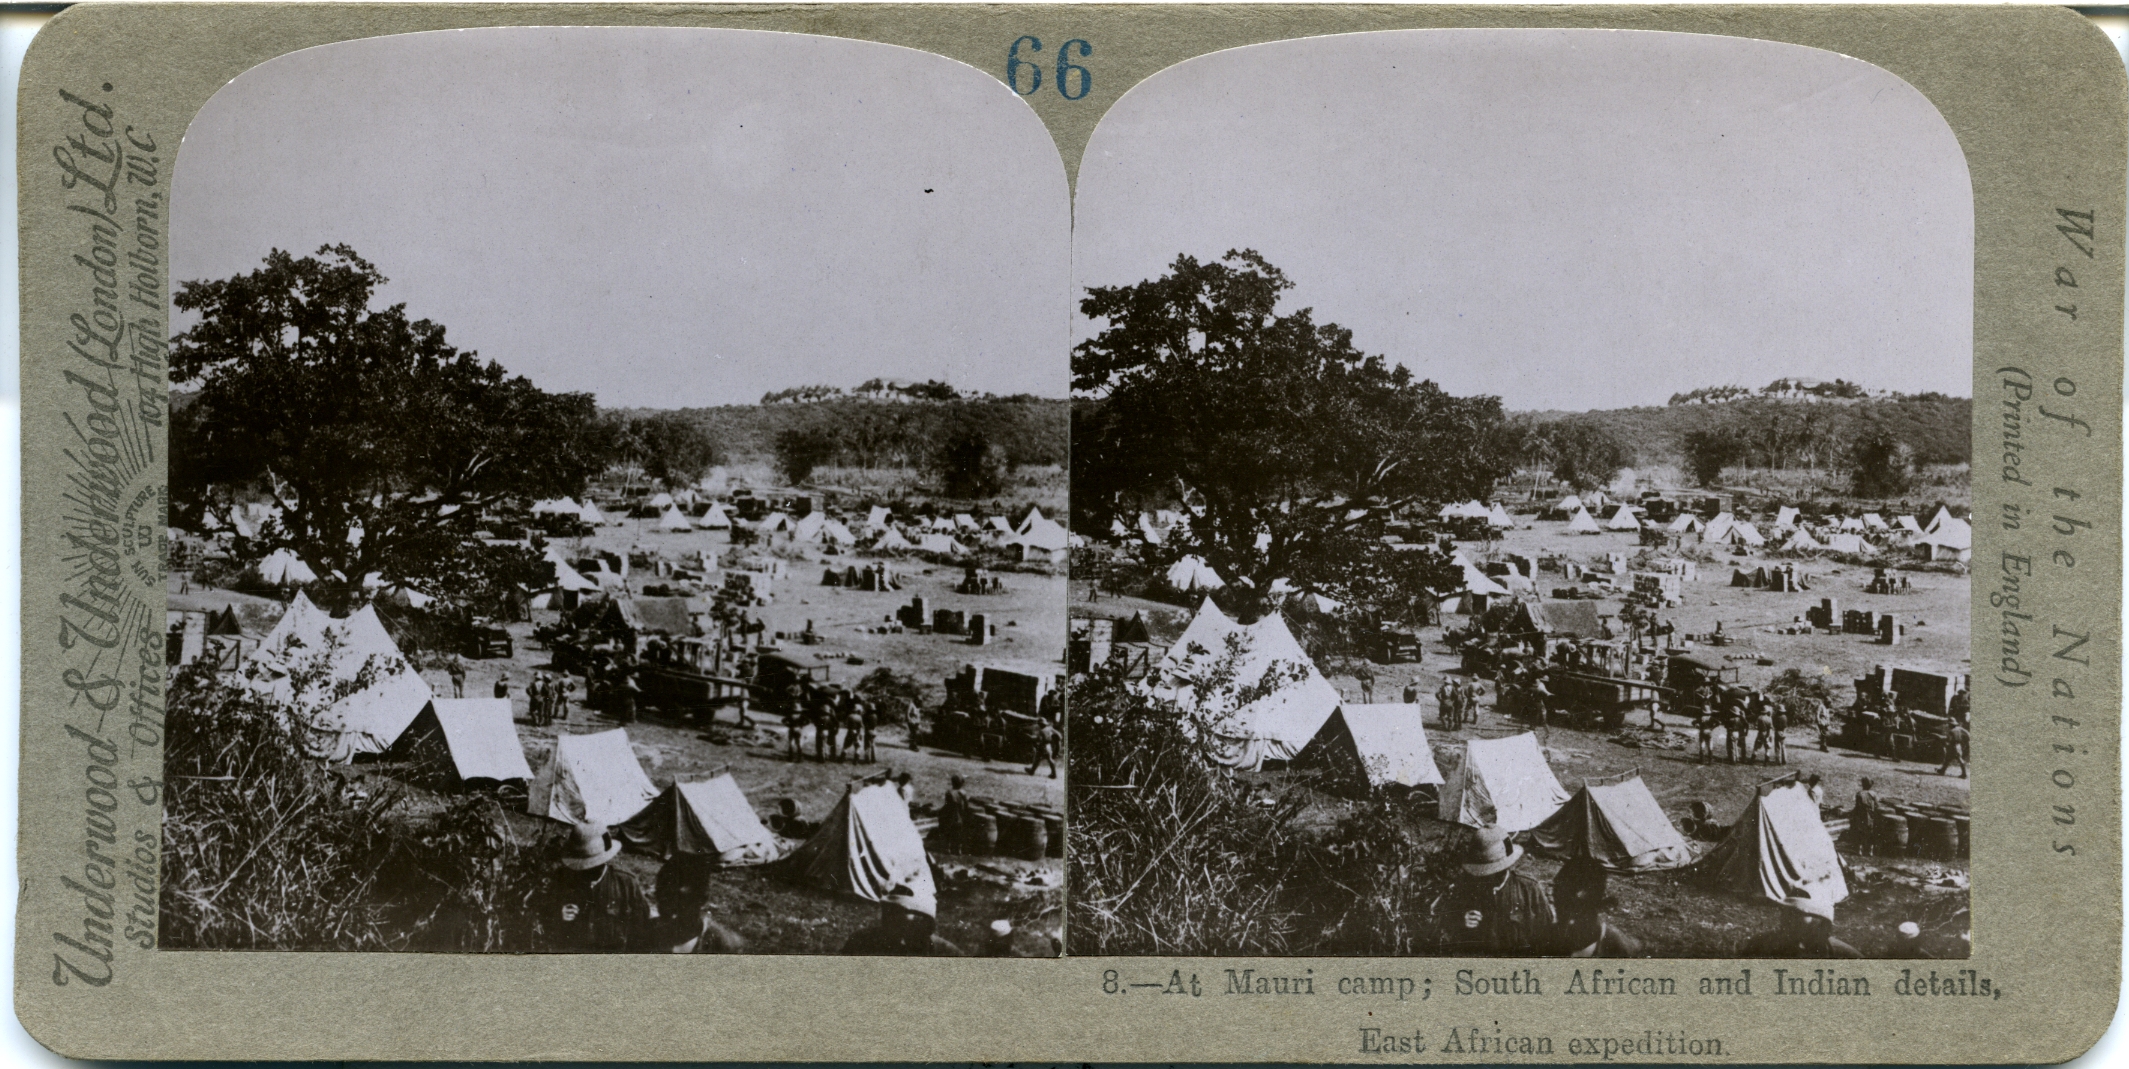 At Mauri camp; South African and Indian details, East African expedition